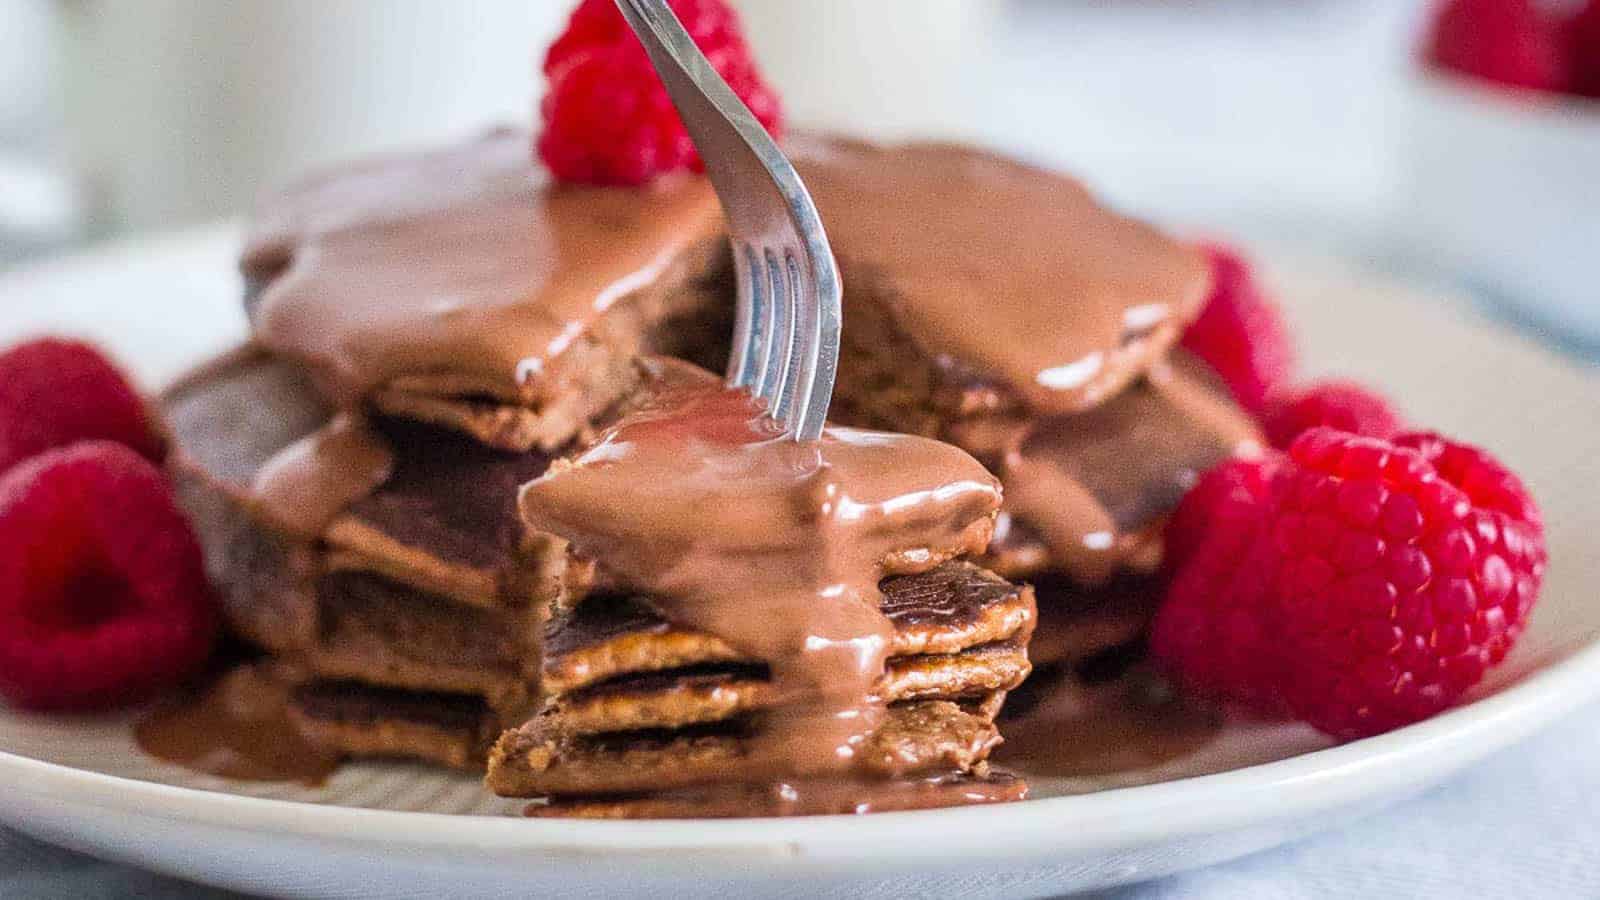 Stack of chocolate protein pancakes with chocolate sauce and raspberries on a plate.